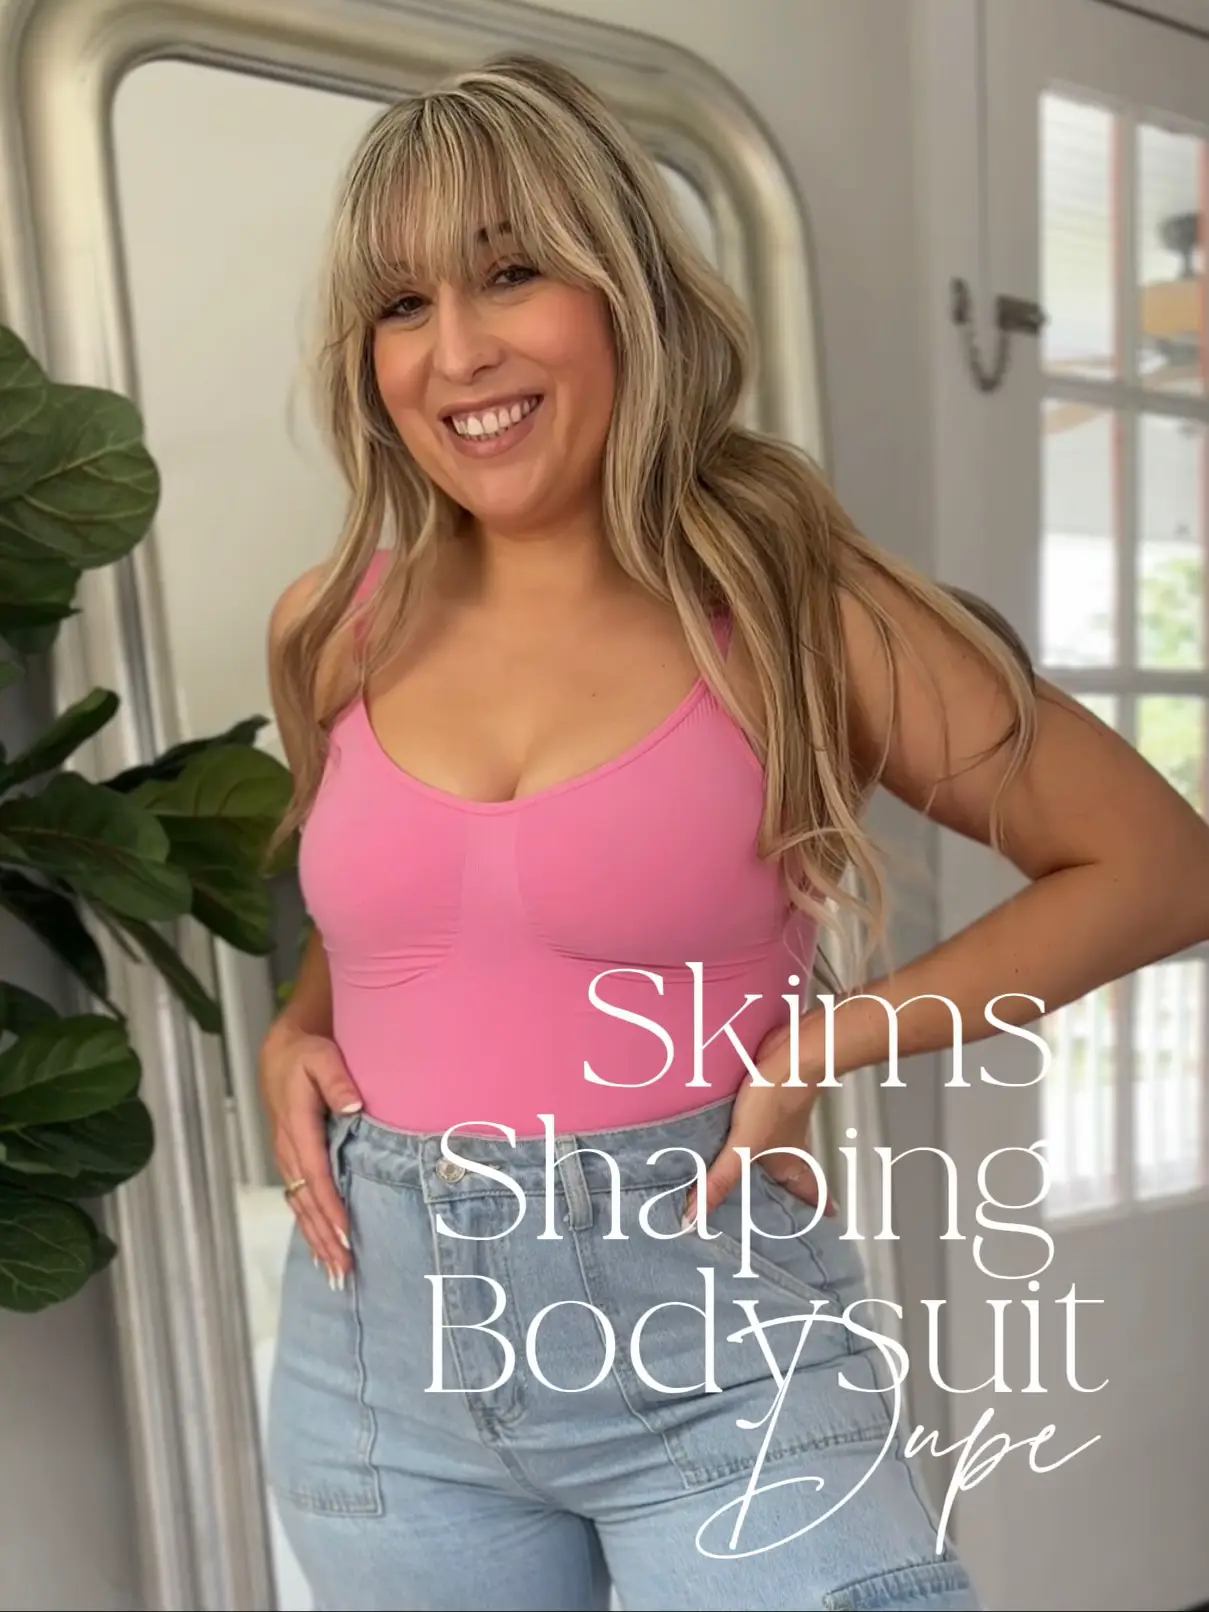 SKIMS SCULPTING BODYSUITS TRY ON🤎